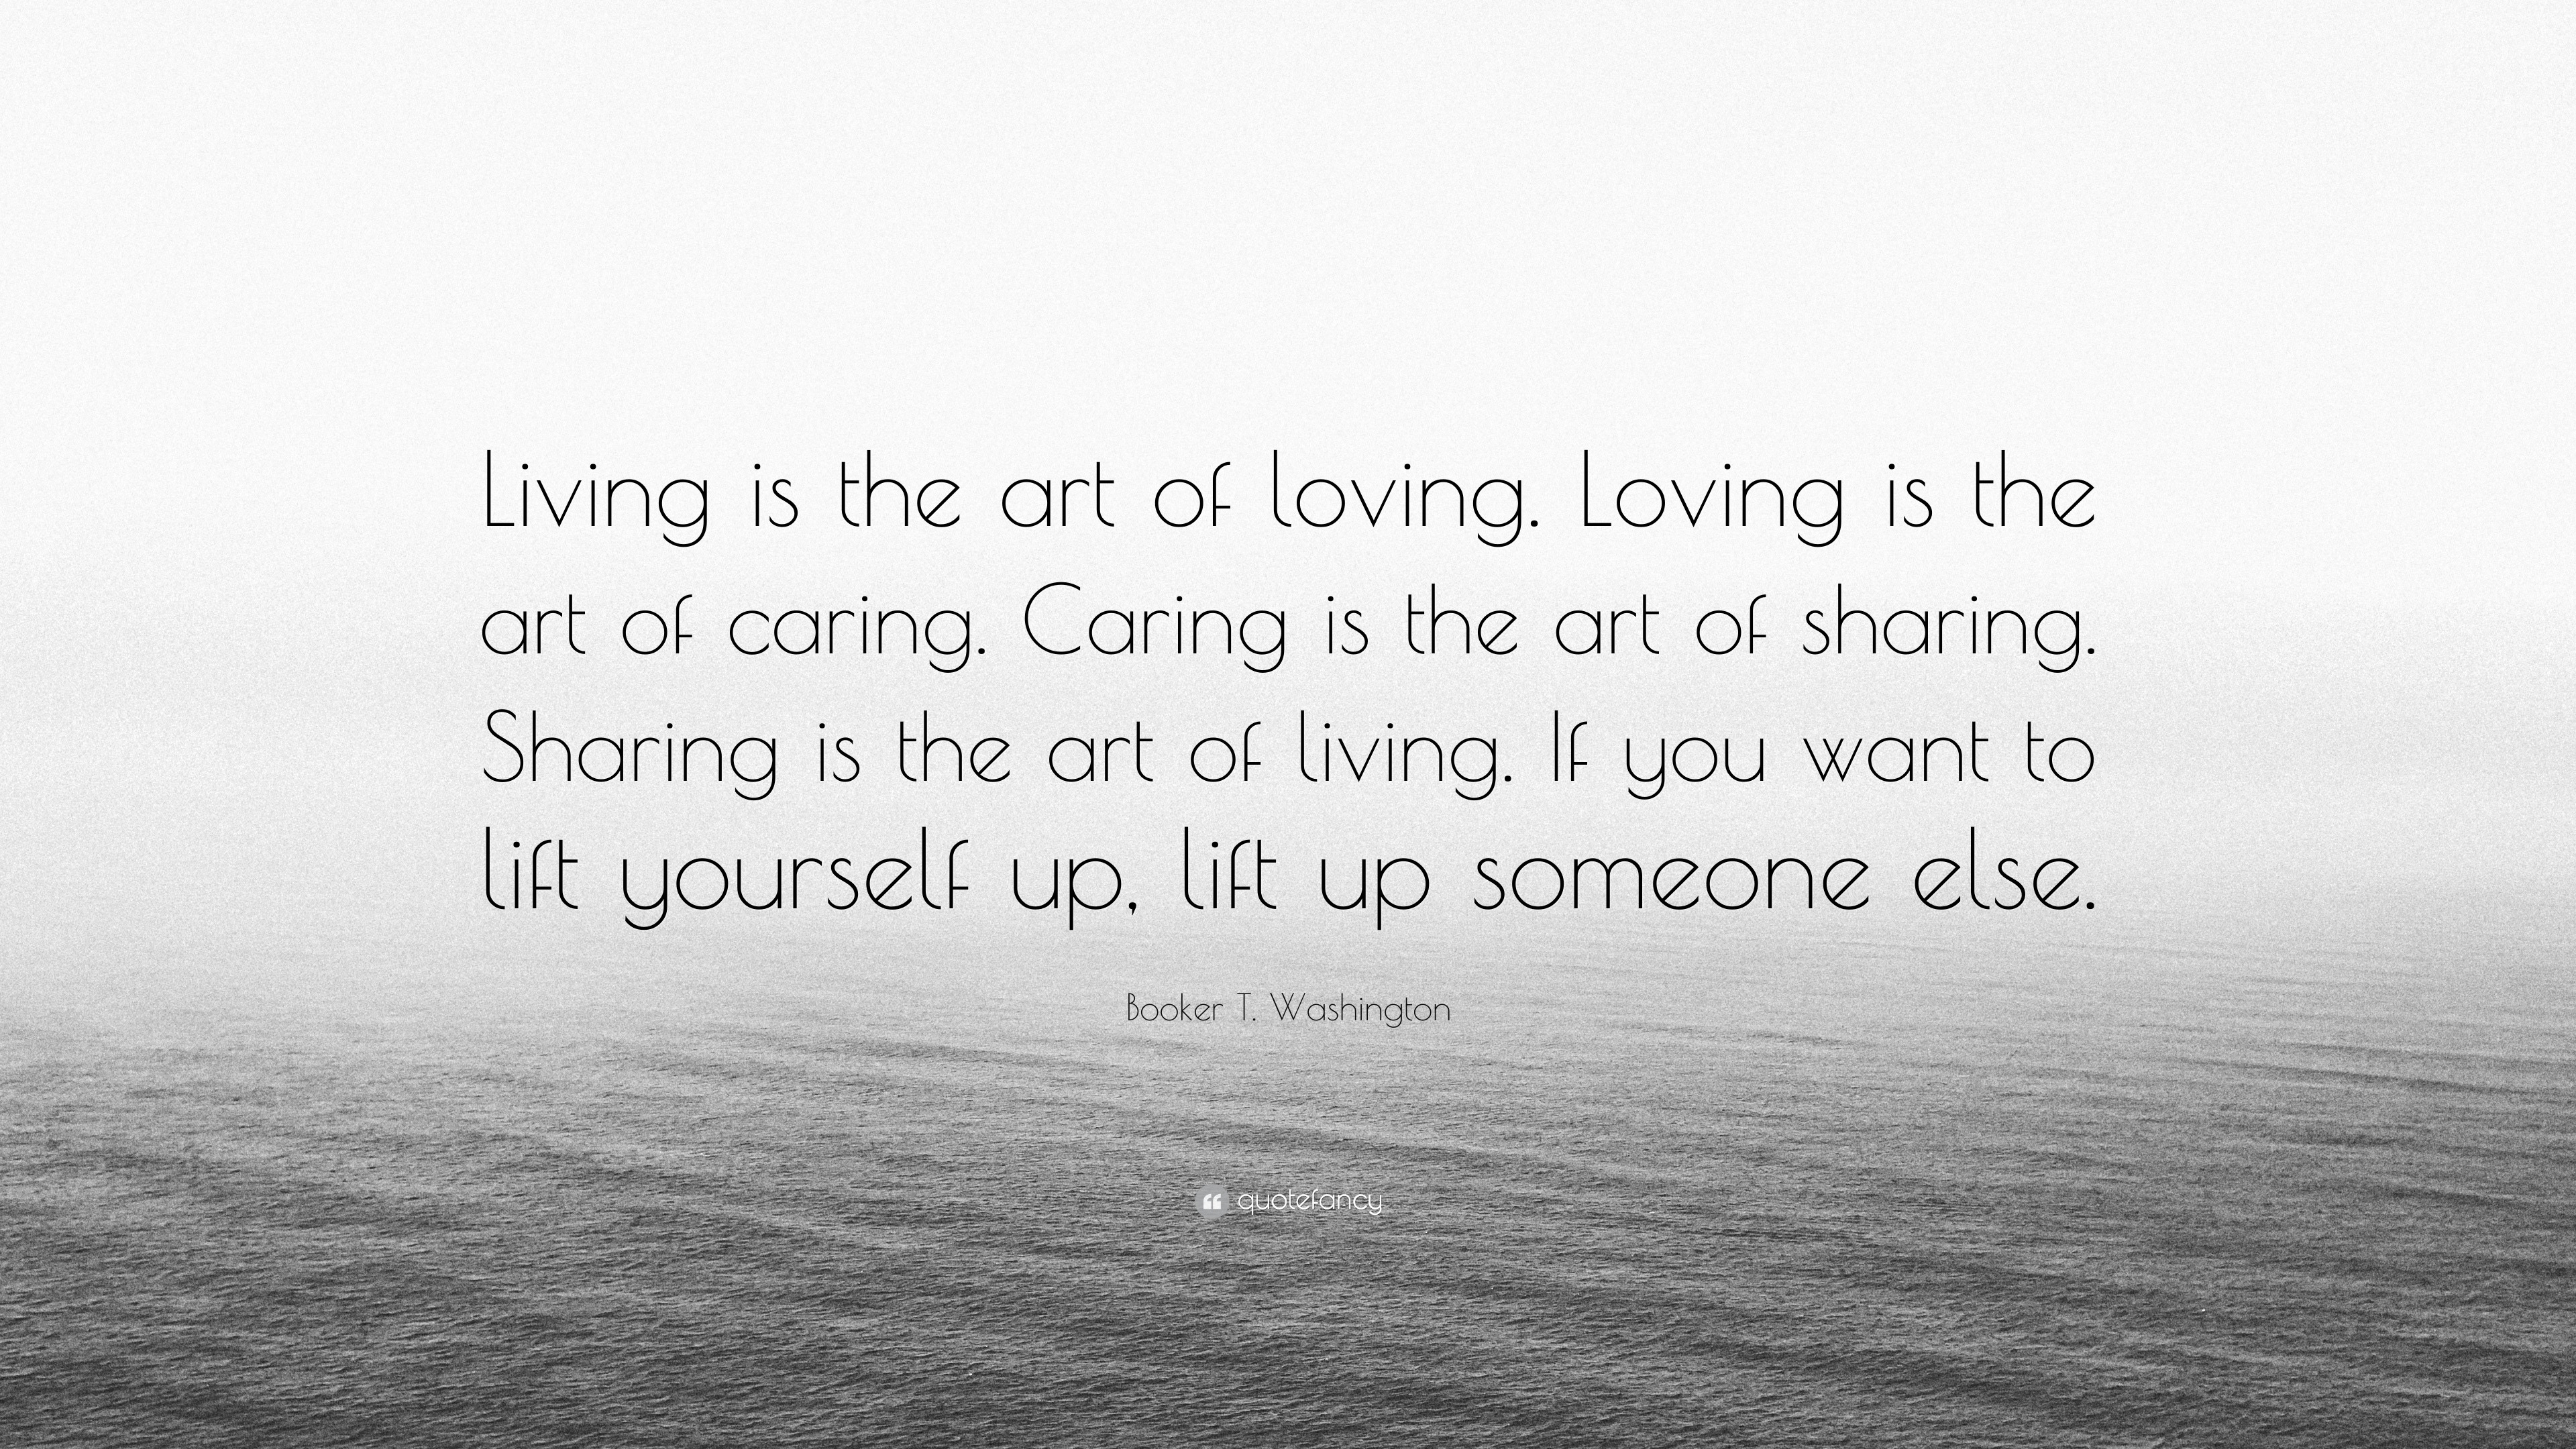 Booker T Washington Quote “Living is the art of loving Loving is